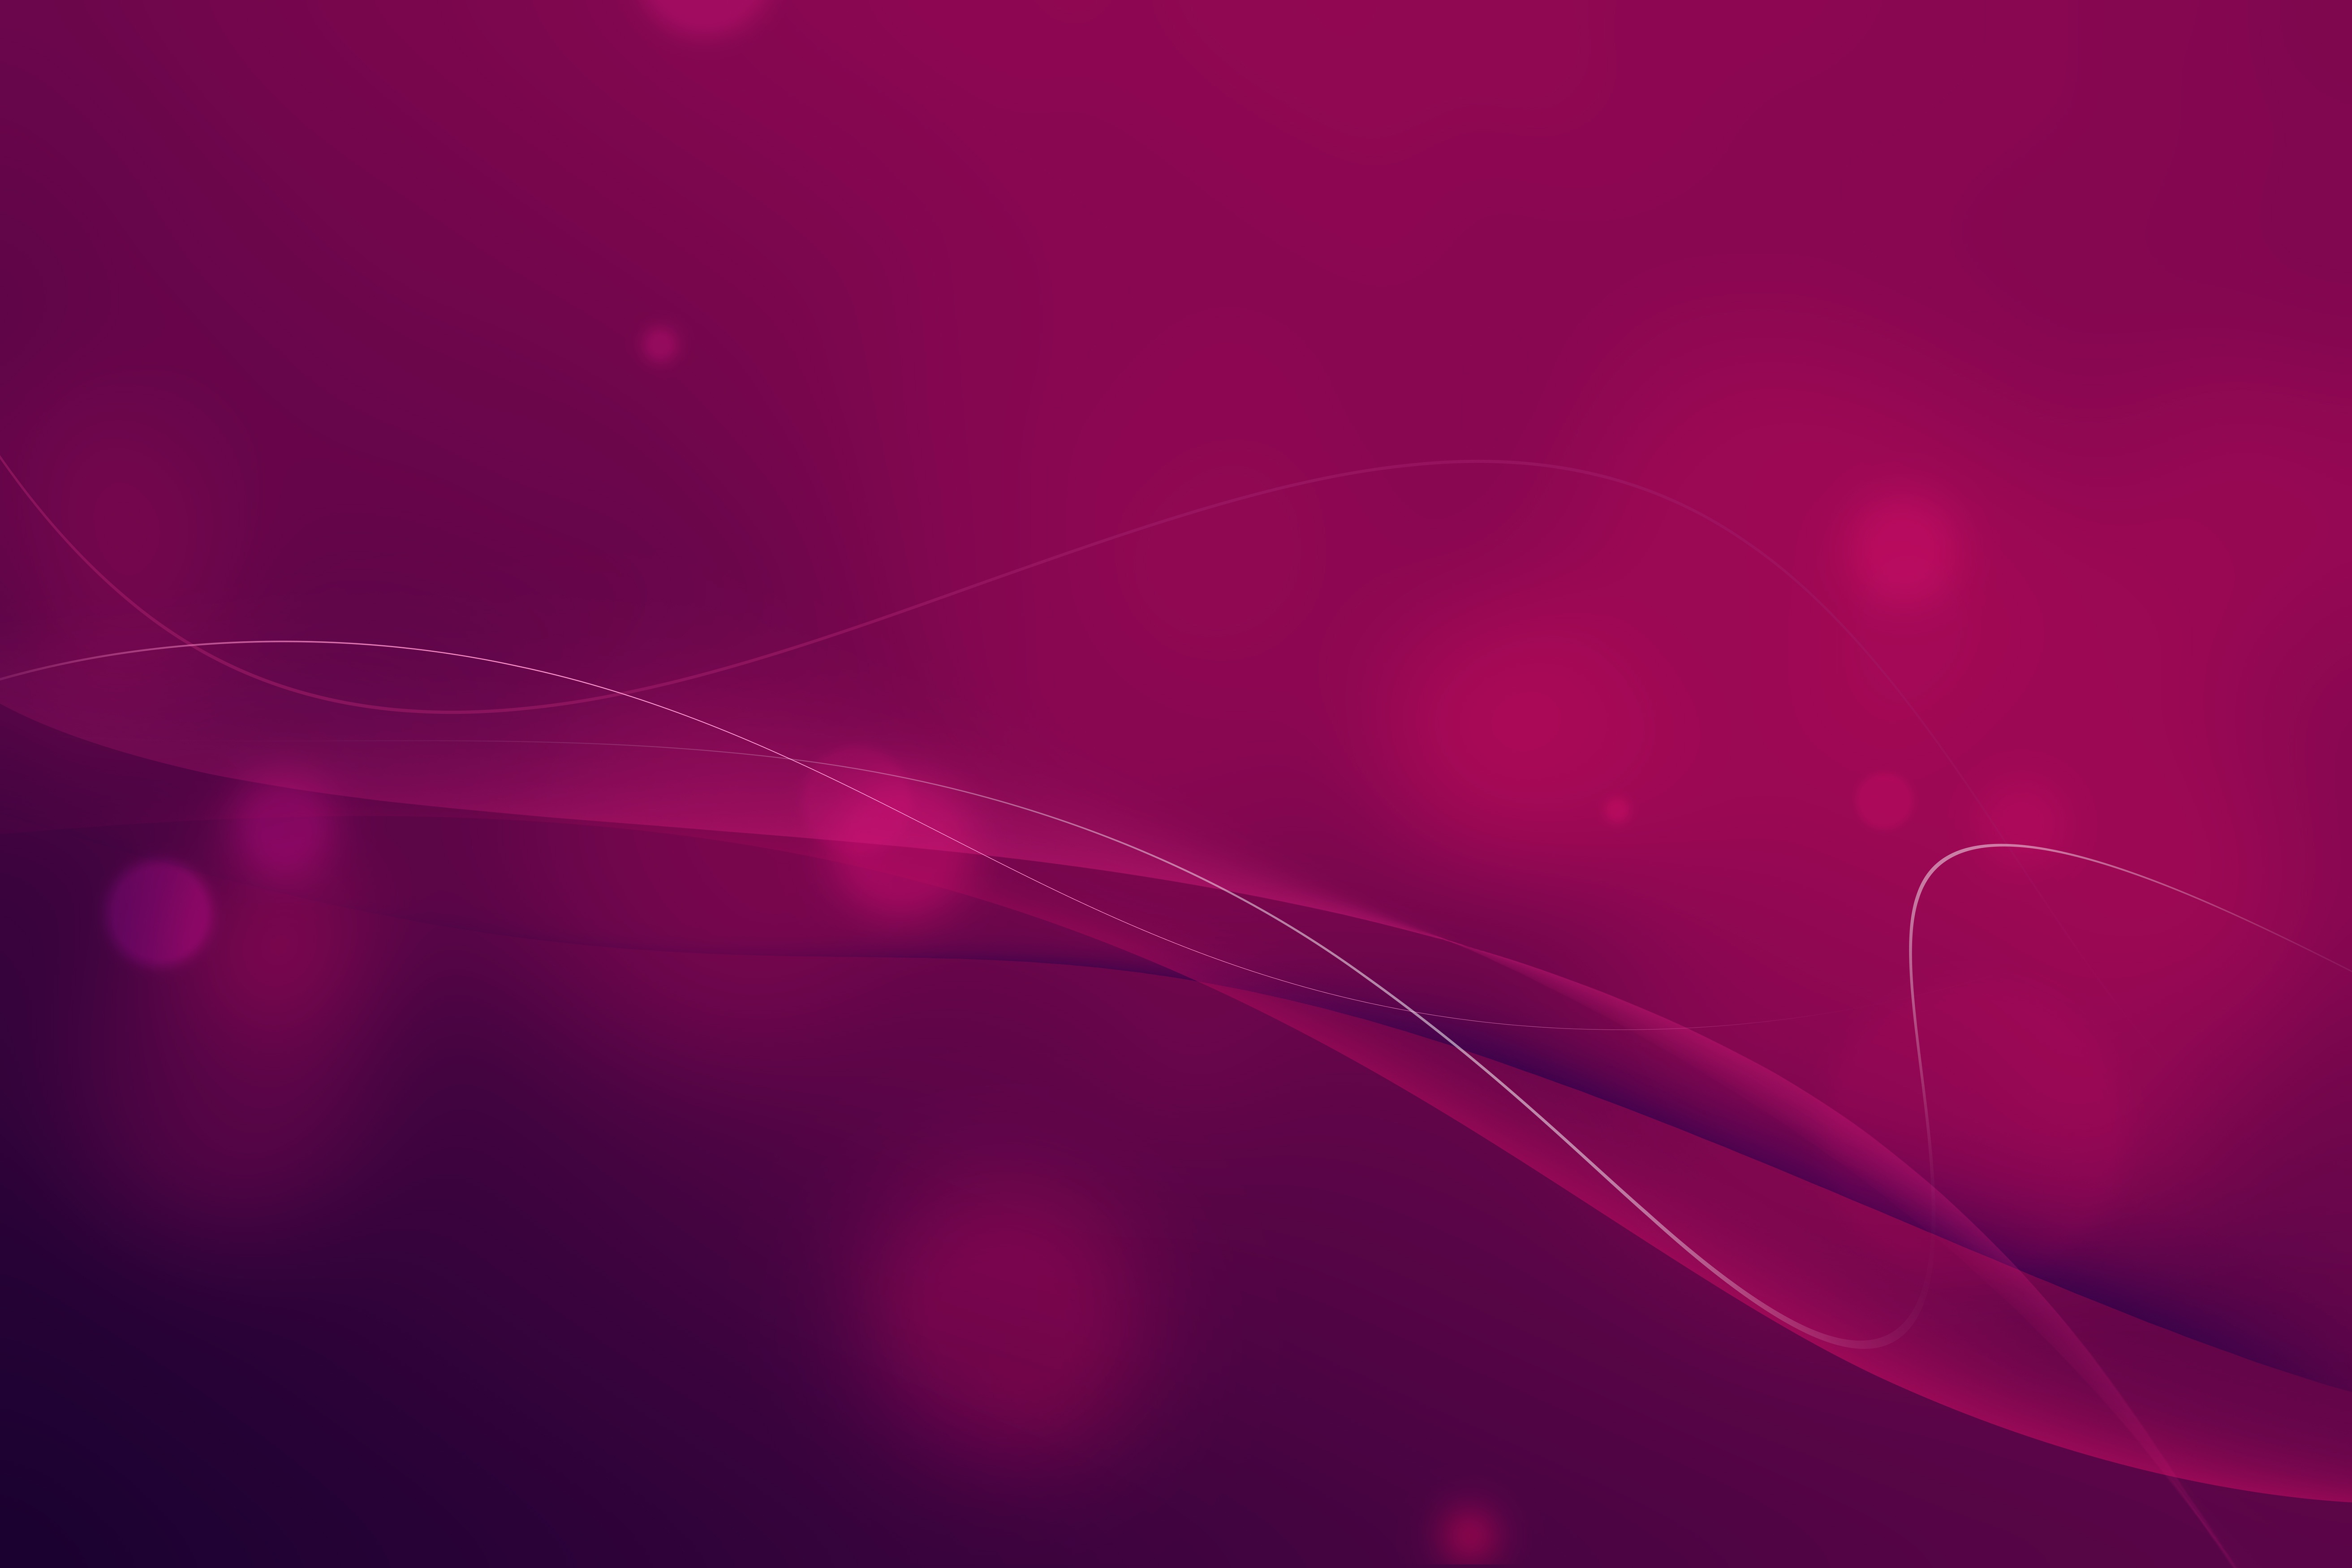 HD desktop wallpaper: Abstract, Pink download free picture #978074